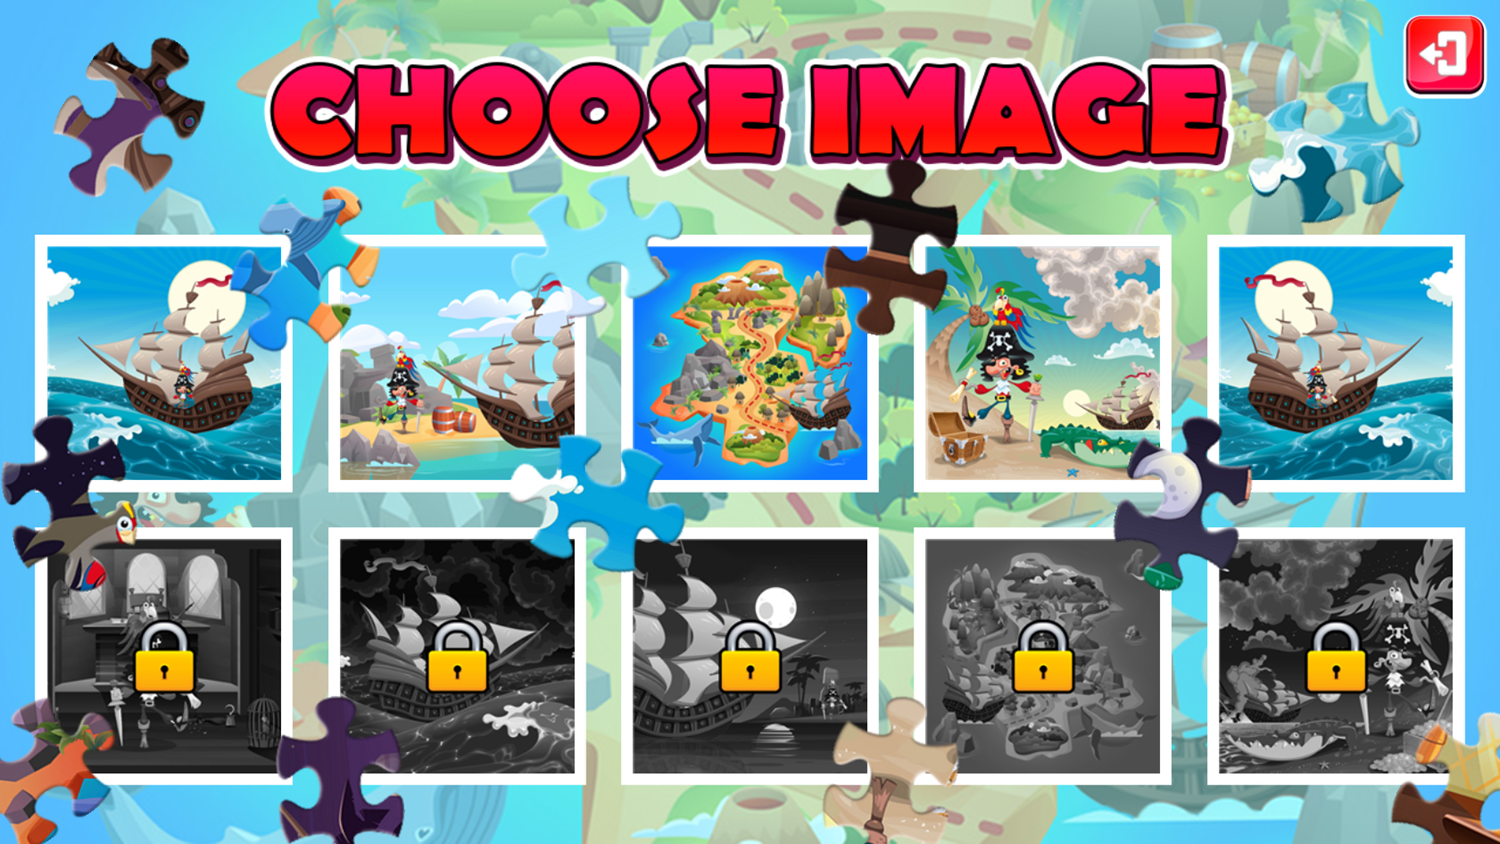 Find the Treasure Jigsaw Puzzle Game Choose Image Screenshot.